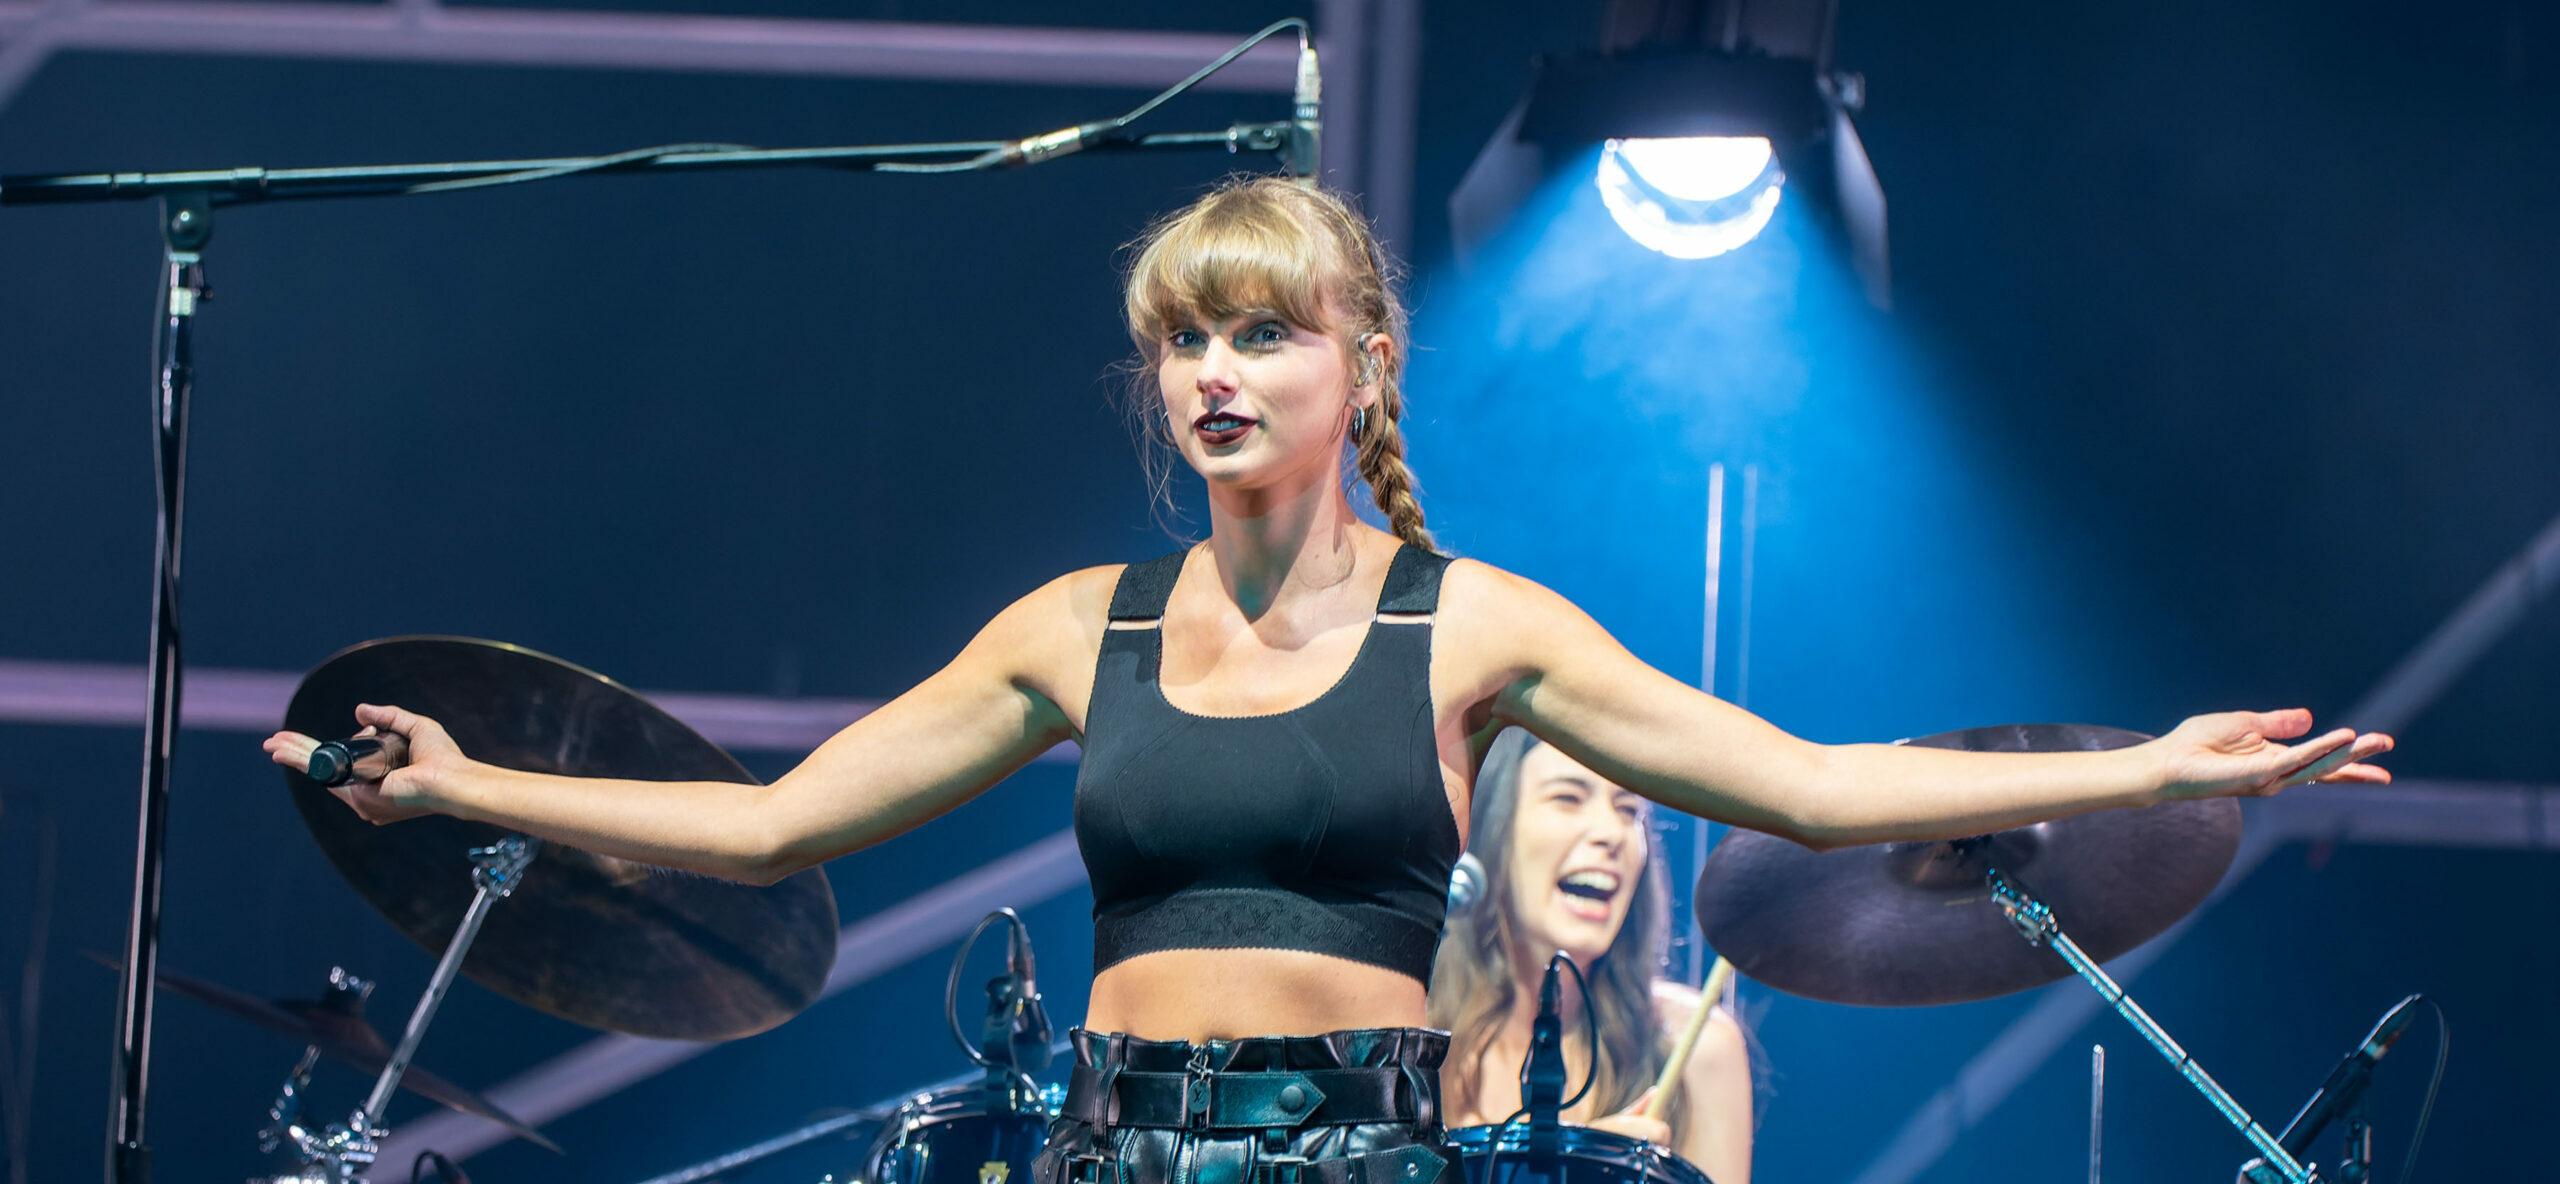 Taylor Swift Is ‘Shaking Off’ Claims Alleging Copyright Infringement